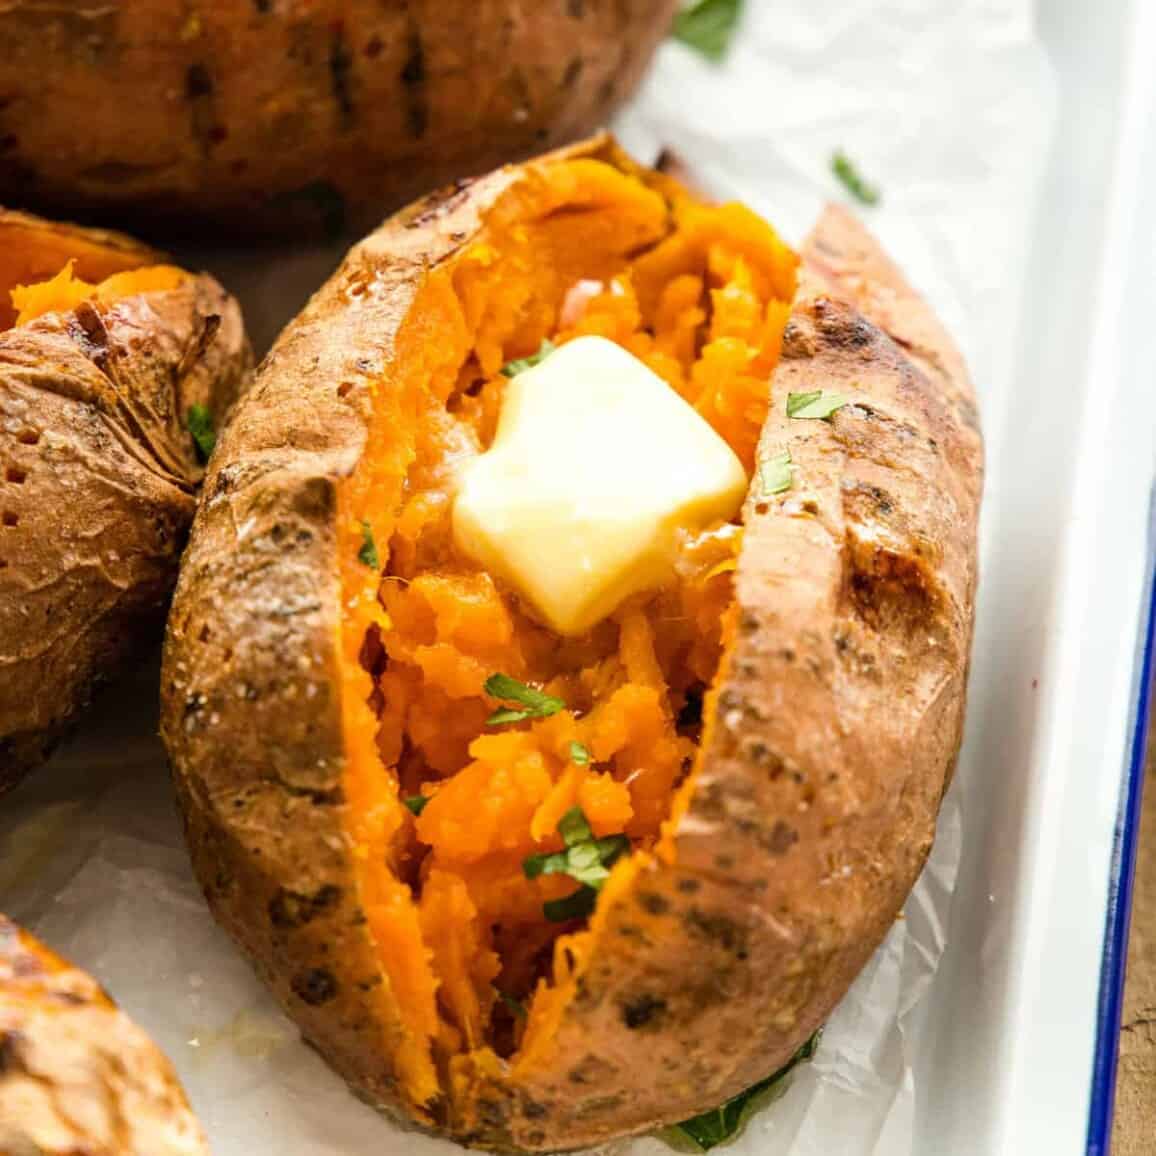 Air Fryer Baked Sweet Potatoes - The Busy Baker